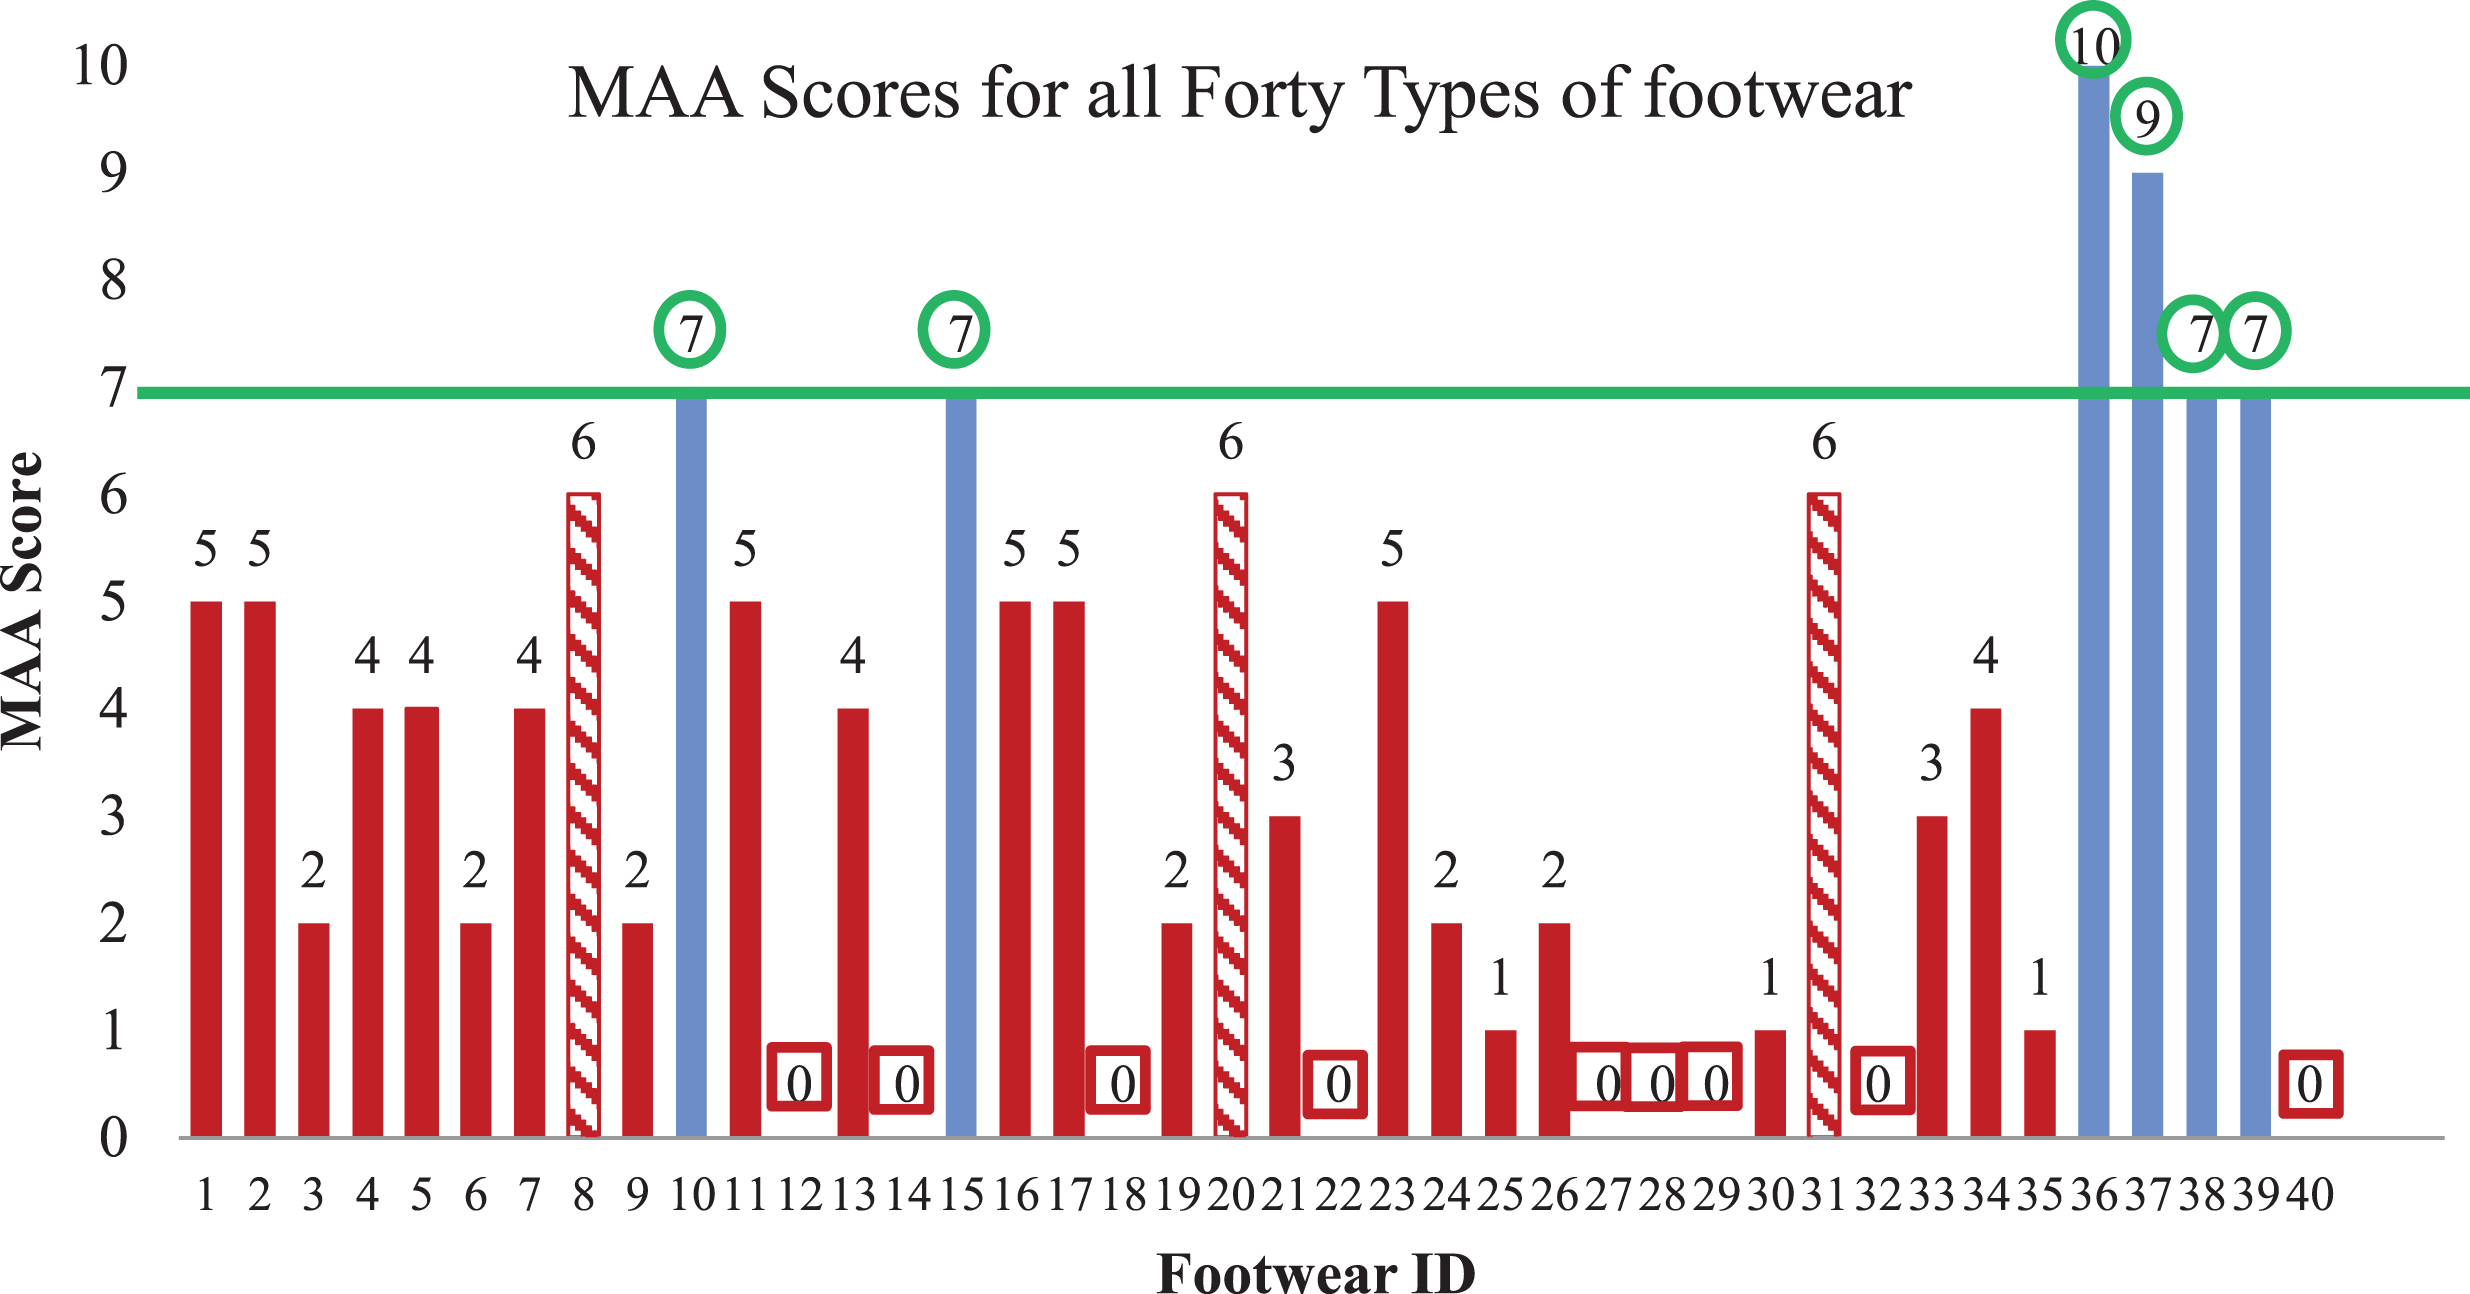 MAA scores for footwear tested in this study. The footwear models that passed our threshold score of 7° (demonstrating good slip resistance) are indicated with a green circle. The blue bars represent footwear that were tested by four participants in total. The red bars and red squares represent the footwear that completed the screening phase only. The dashed red bars represent the footwear that completed the screening phase successfully but received a failing score (below 7°) with a subsequent participant. The lowest score of the four conditions measured (bare ice uphill, bare ice downhill, melting ice uphill, melting ice downhill) is shown.